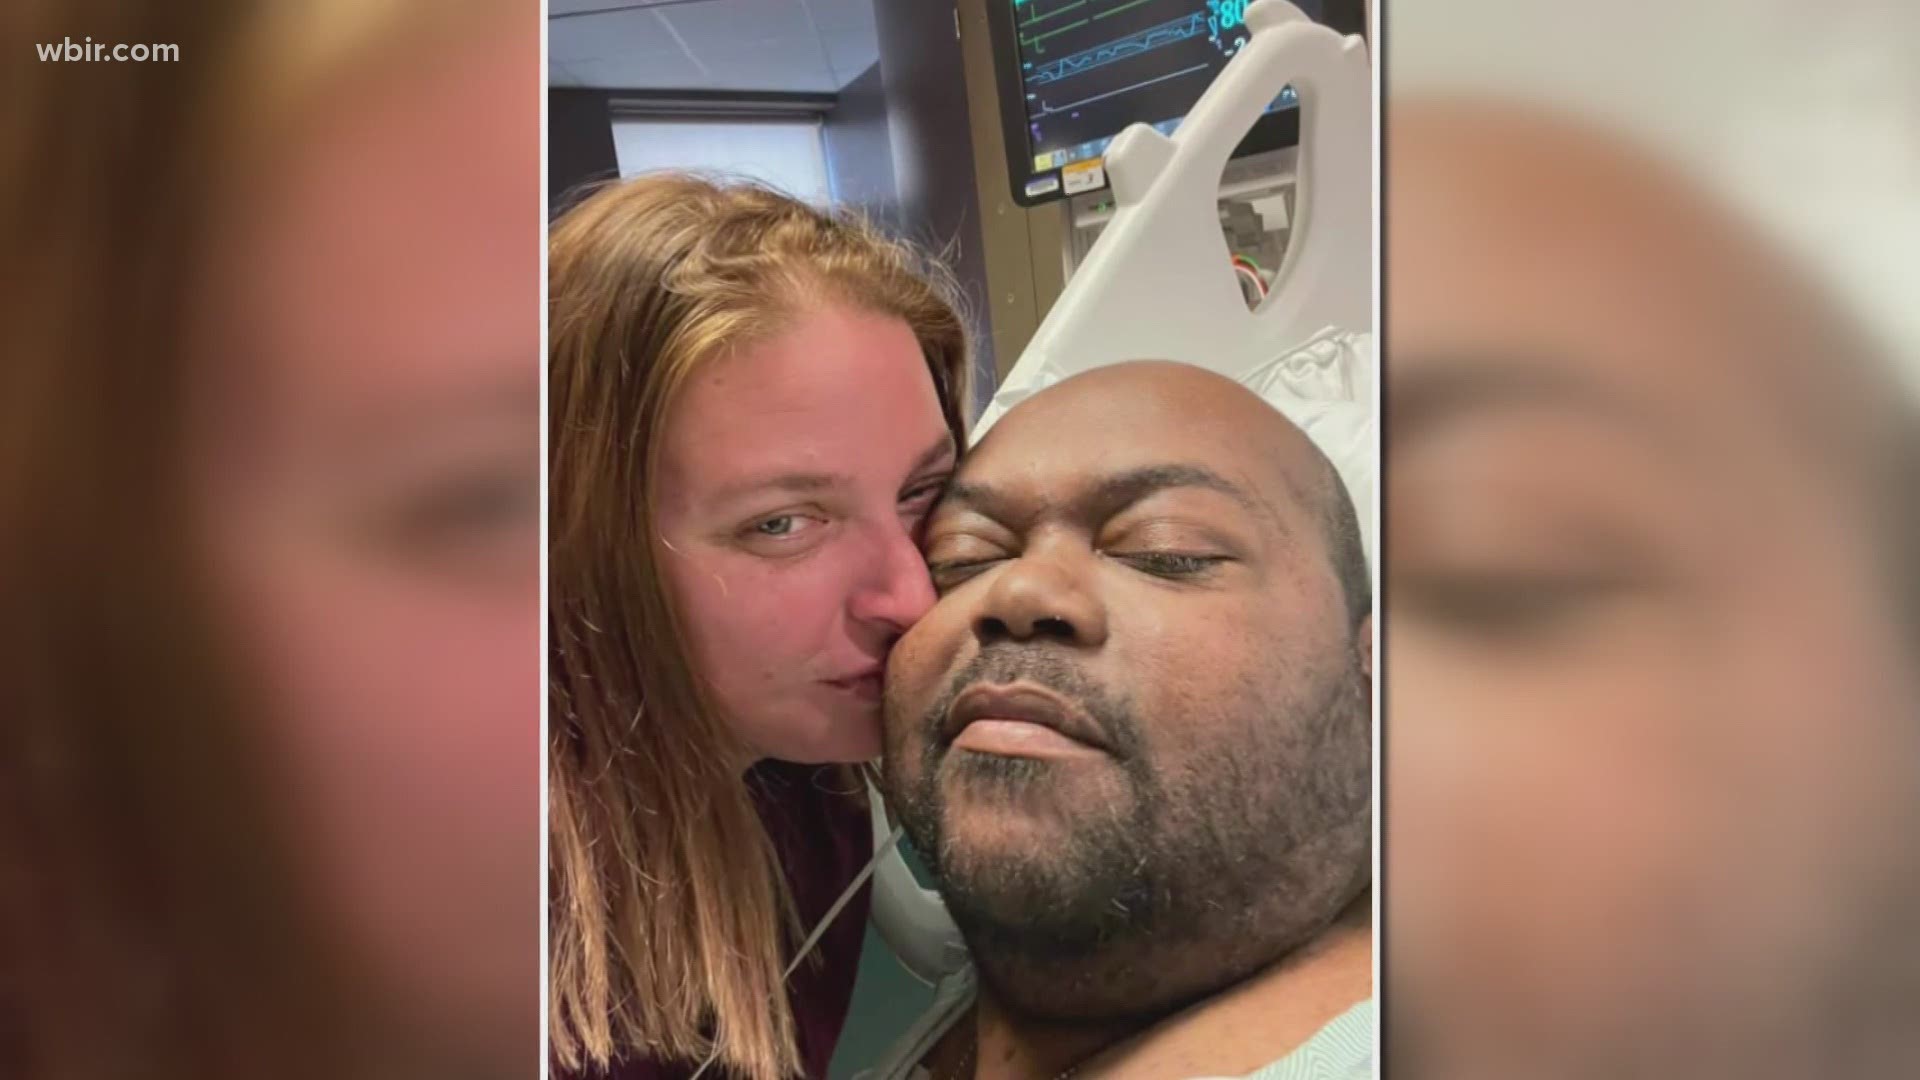 A Knoxville man who waited months for a heart and kidney transplant died over the weekend. His fiancé says this wasn't how his story was supposed to end.